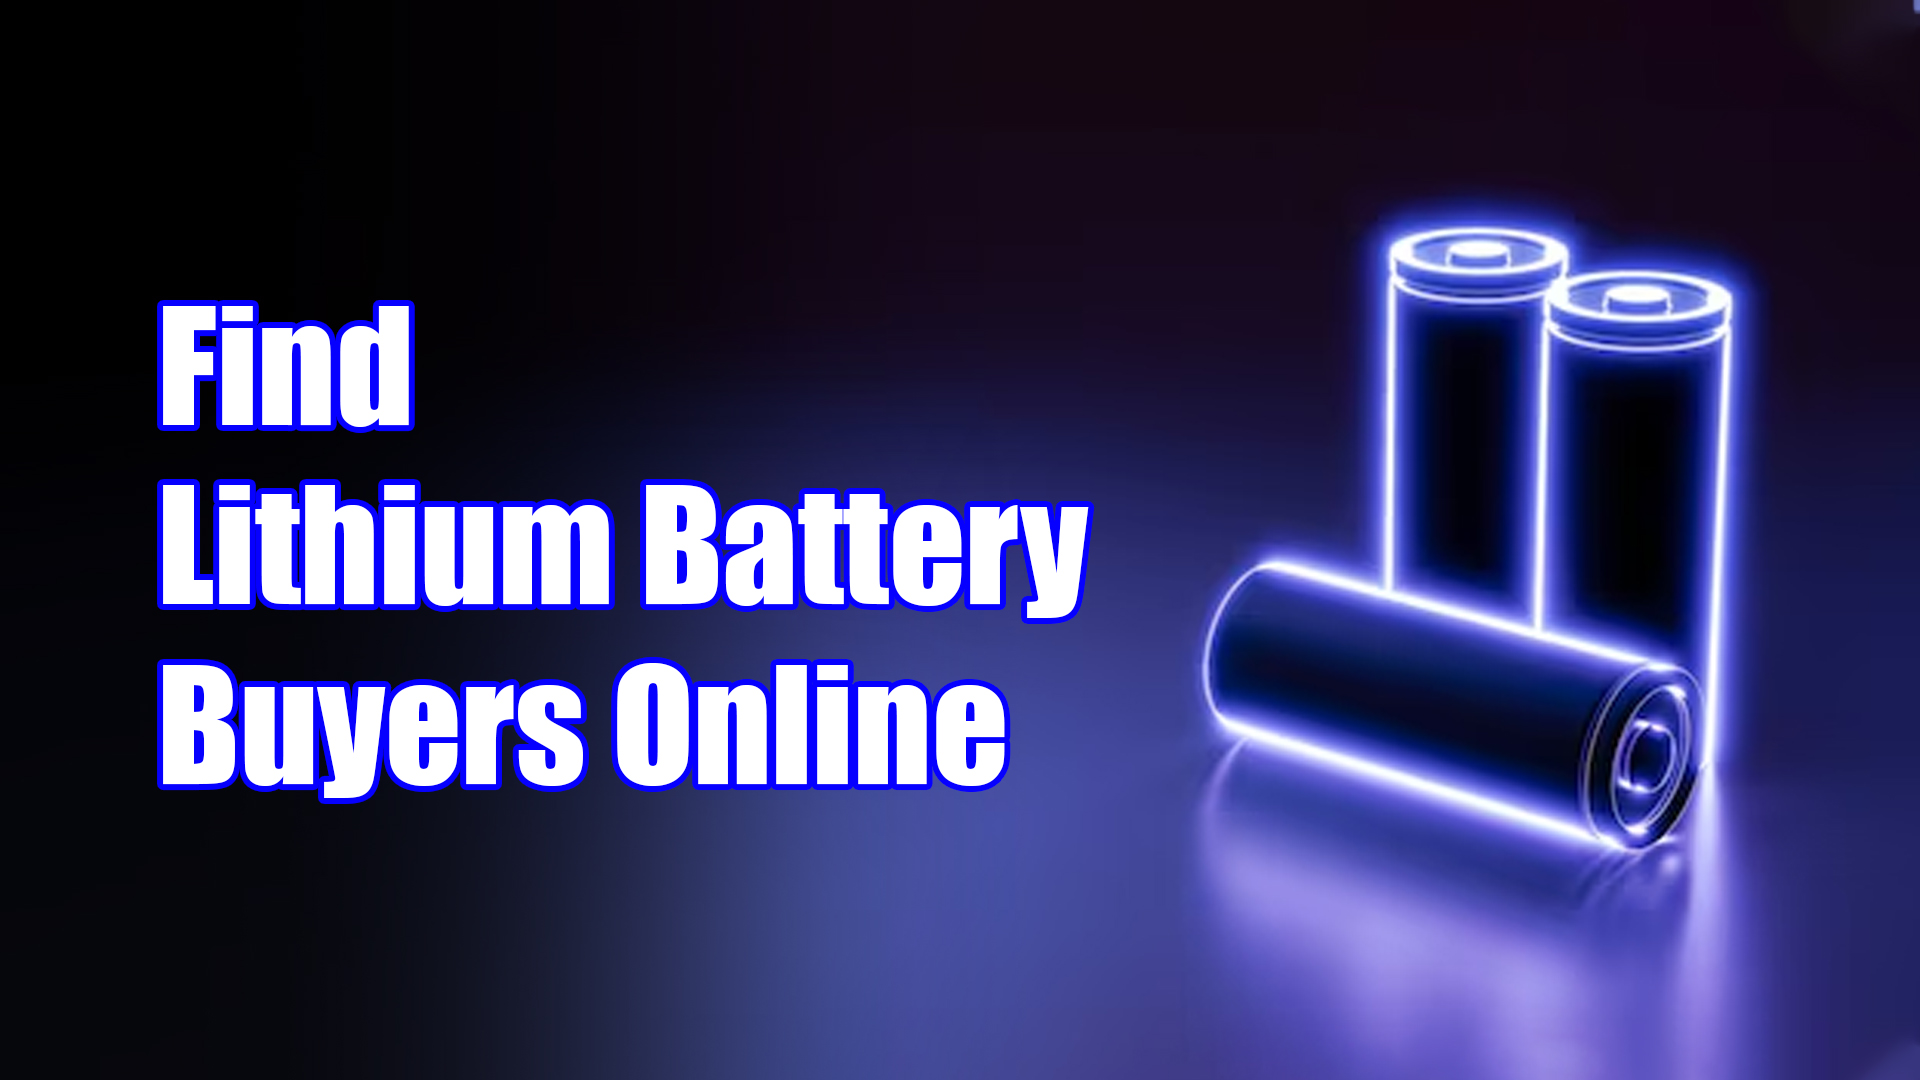 Explore the list of lithium battery buyers online through B2B websites